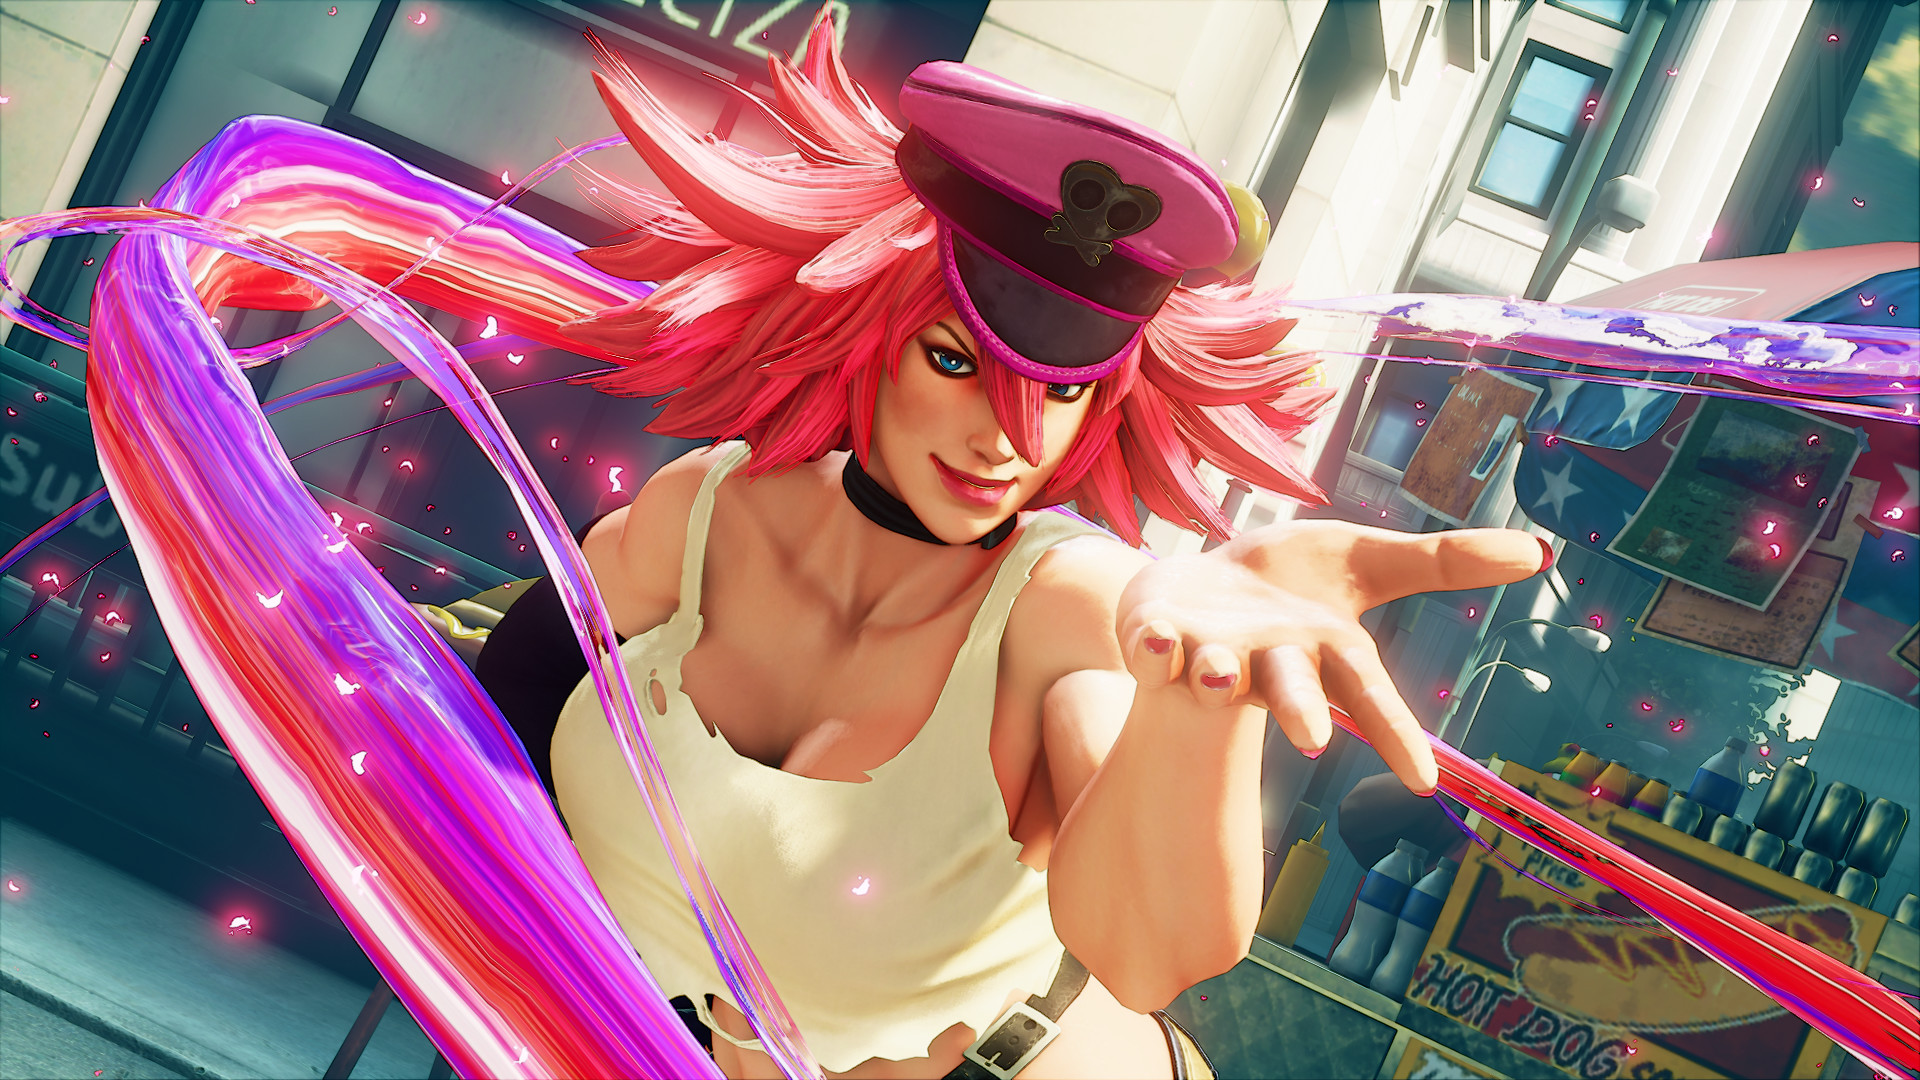 5 Characters That Should Be Added To Street Fighter V Season 5